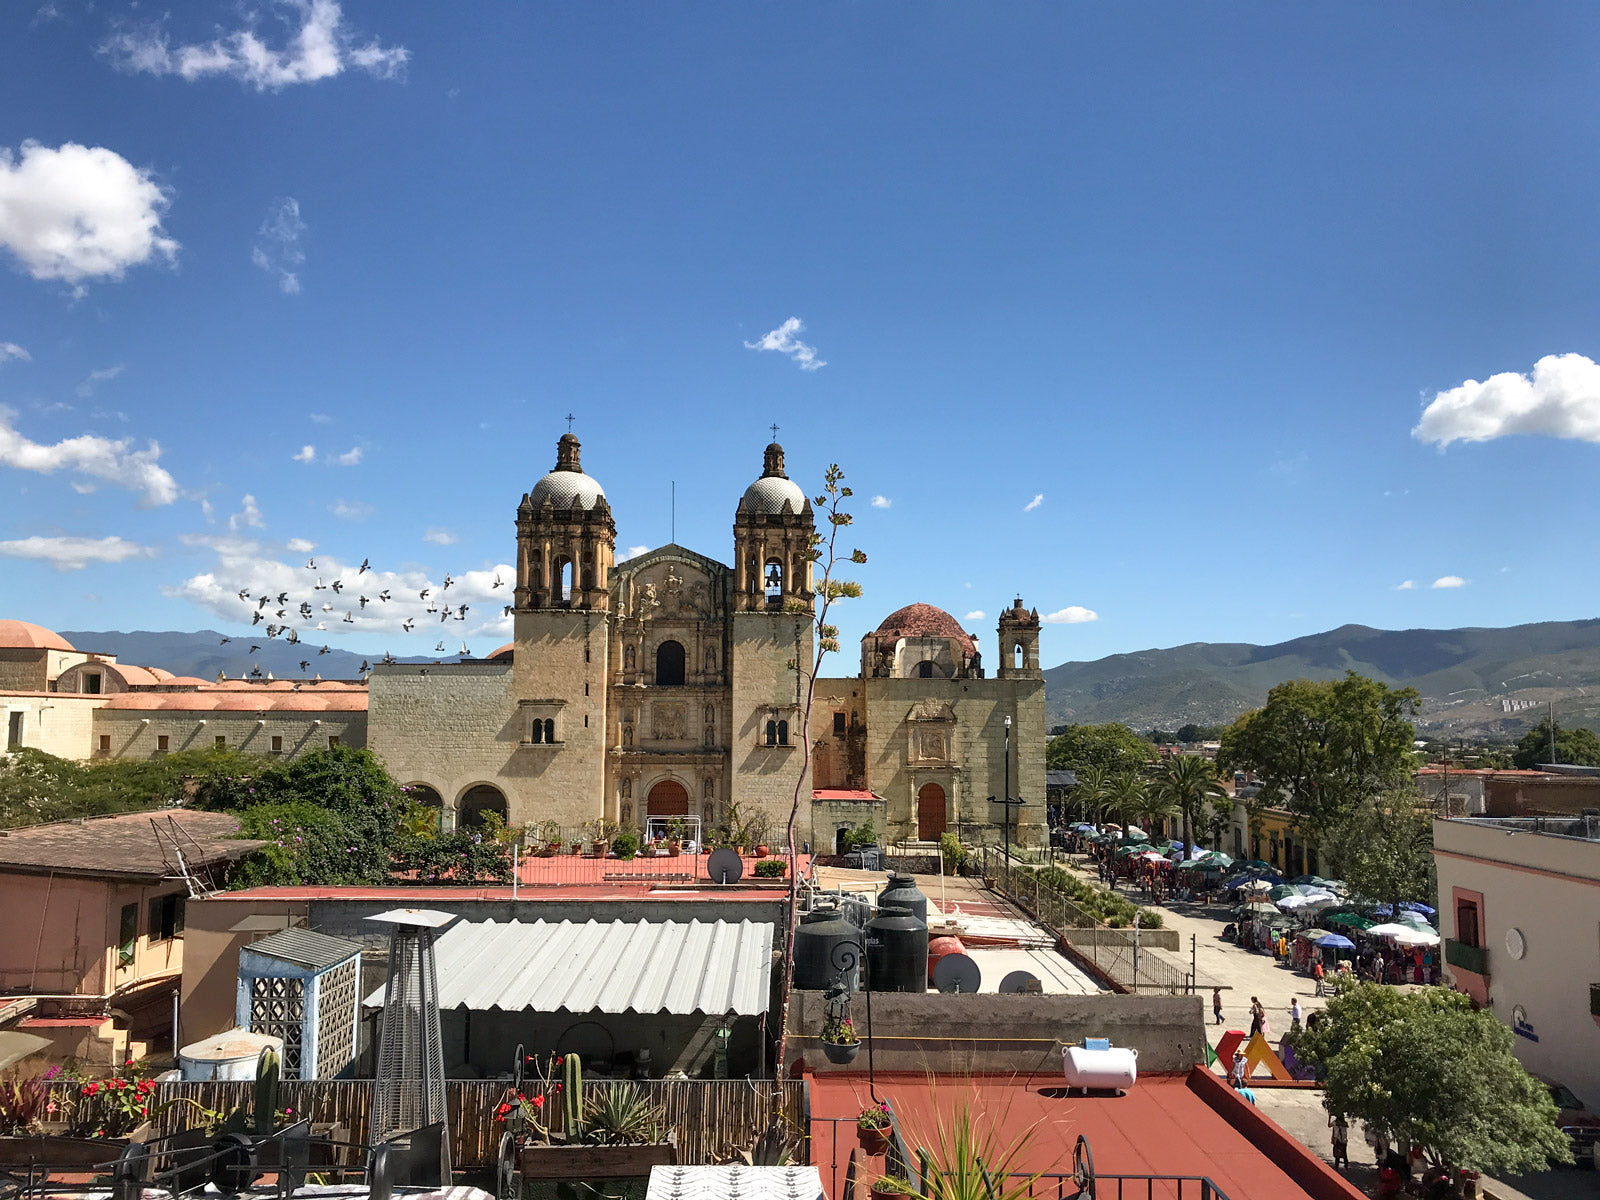 Oaxaca City scape with a large church and blue skies